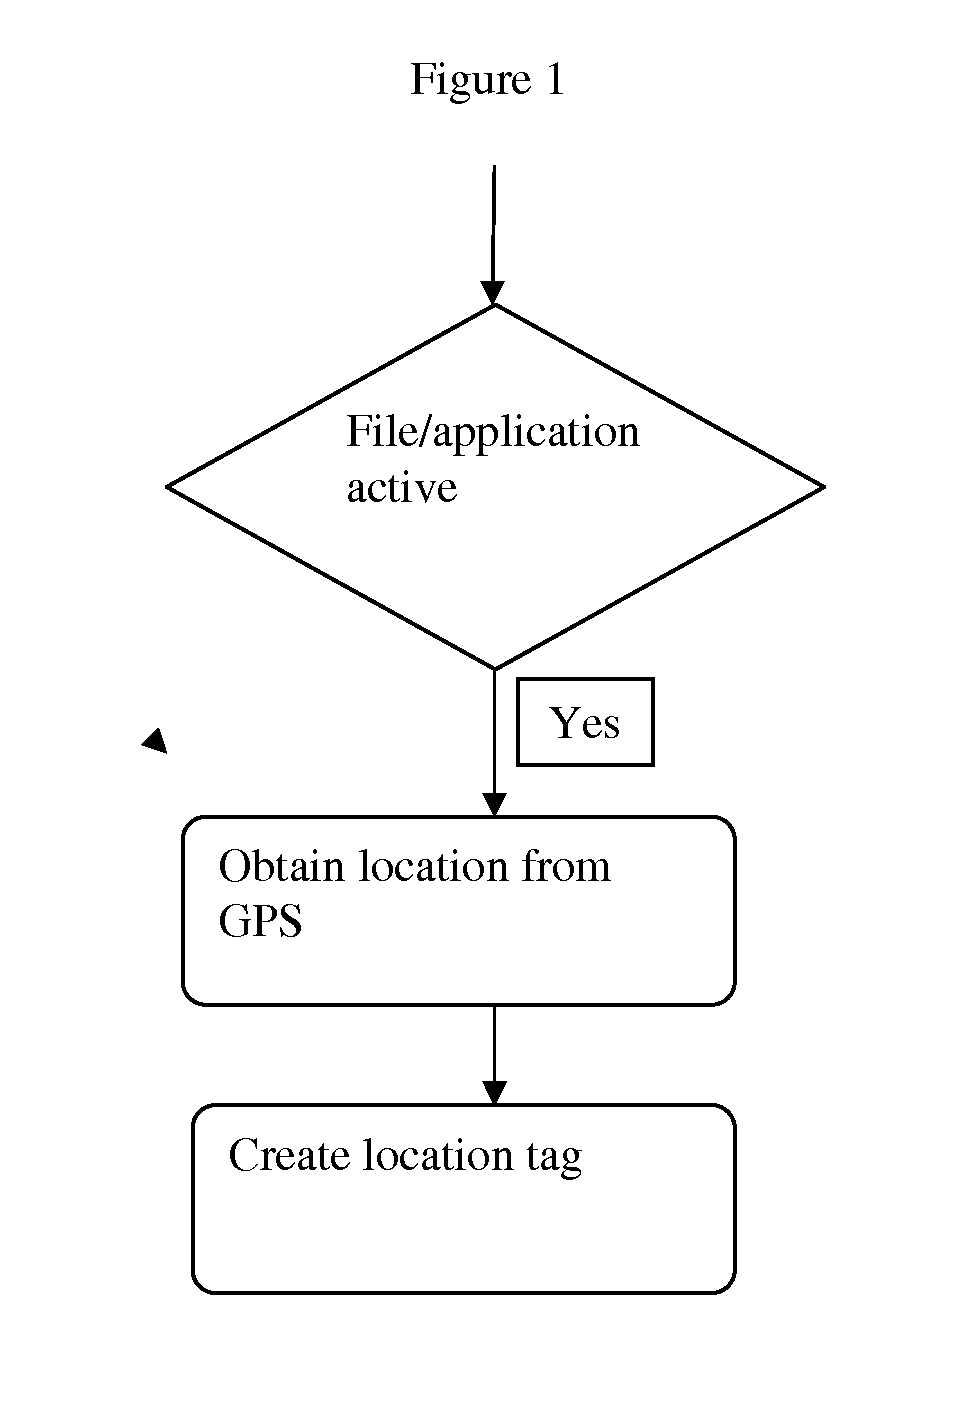 Method and system that open data, files and applications automatically based on geographic location